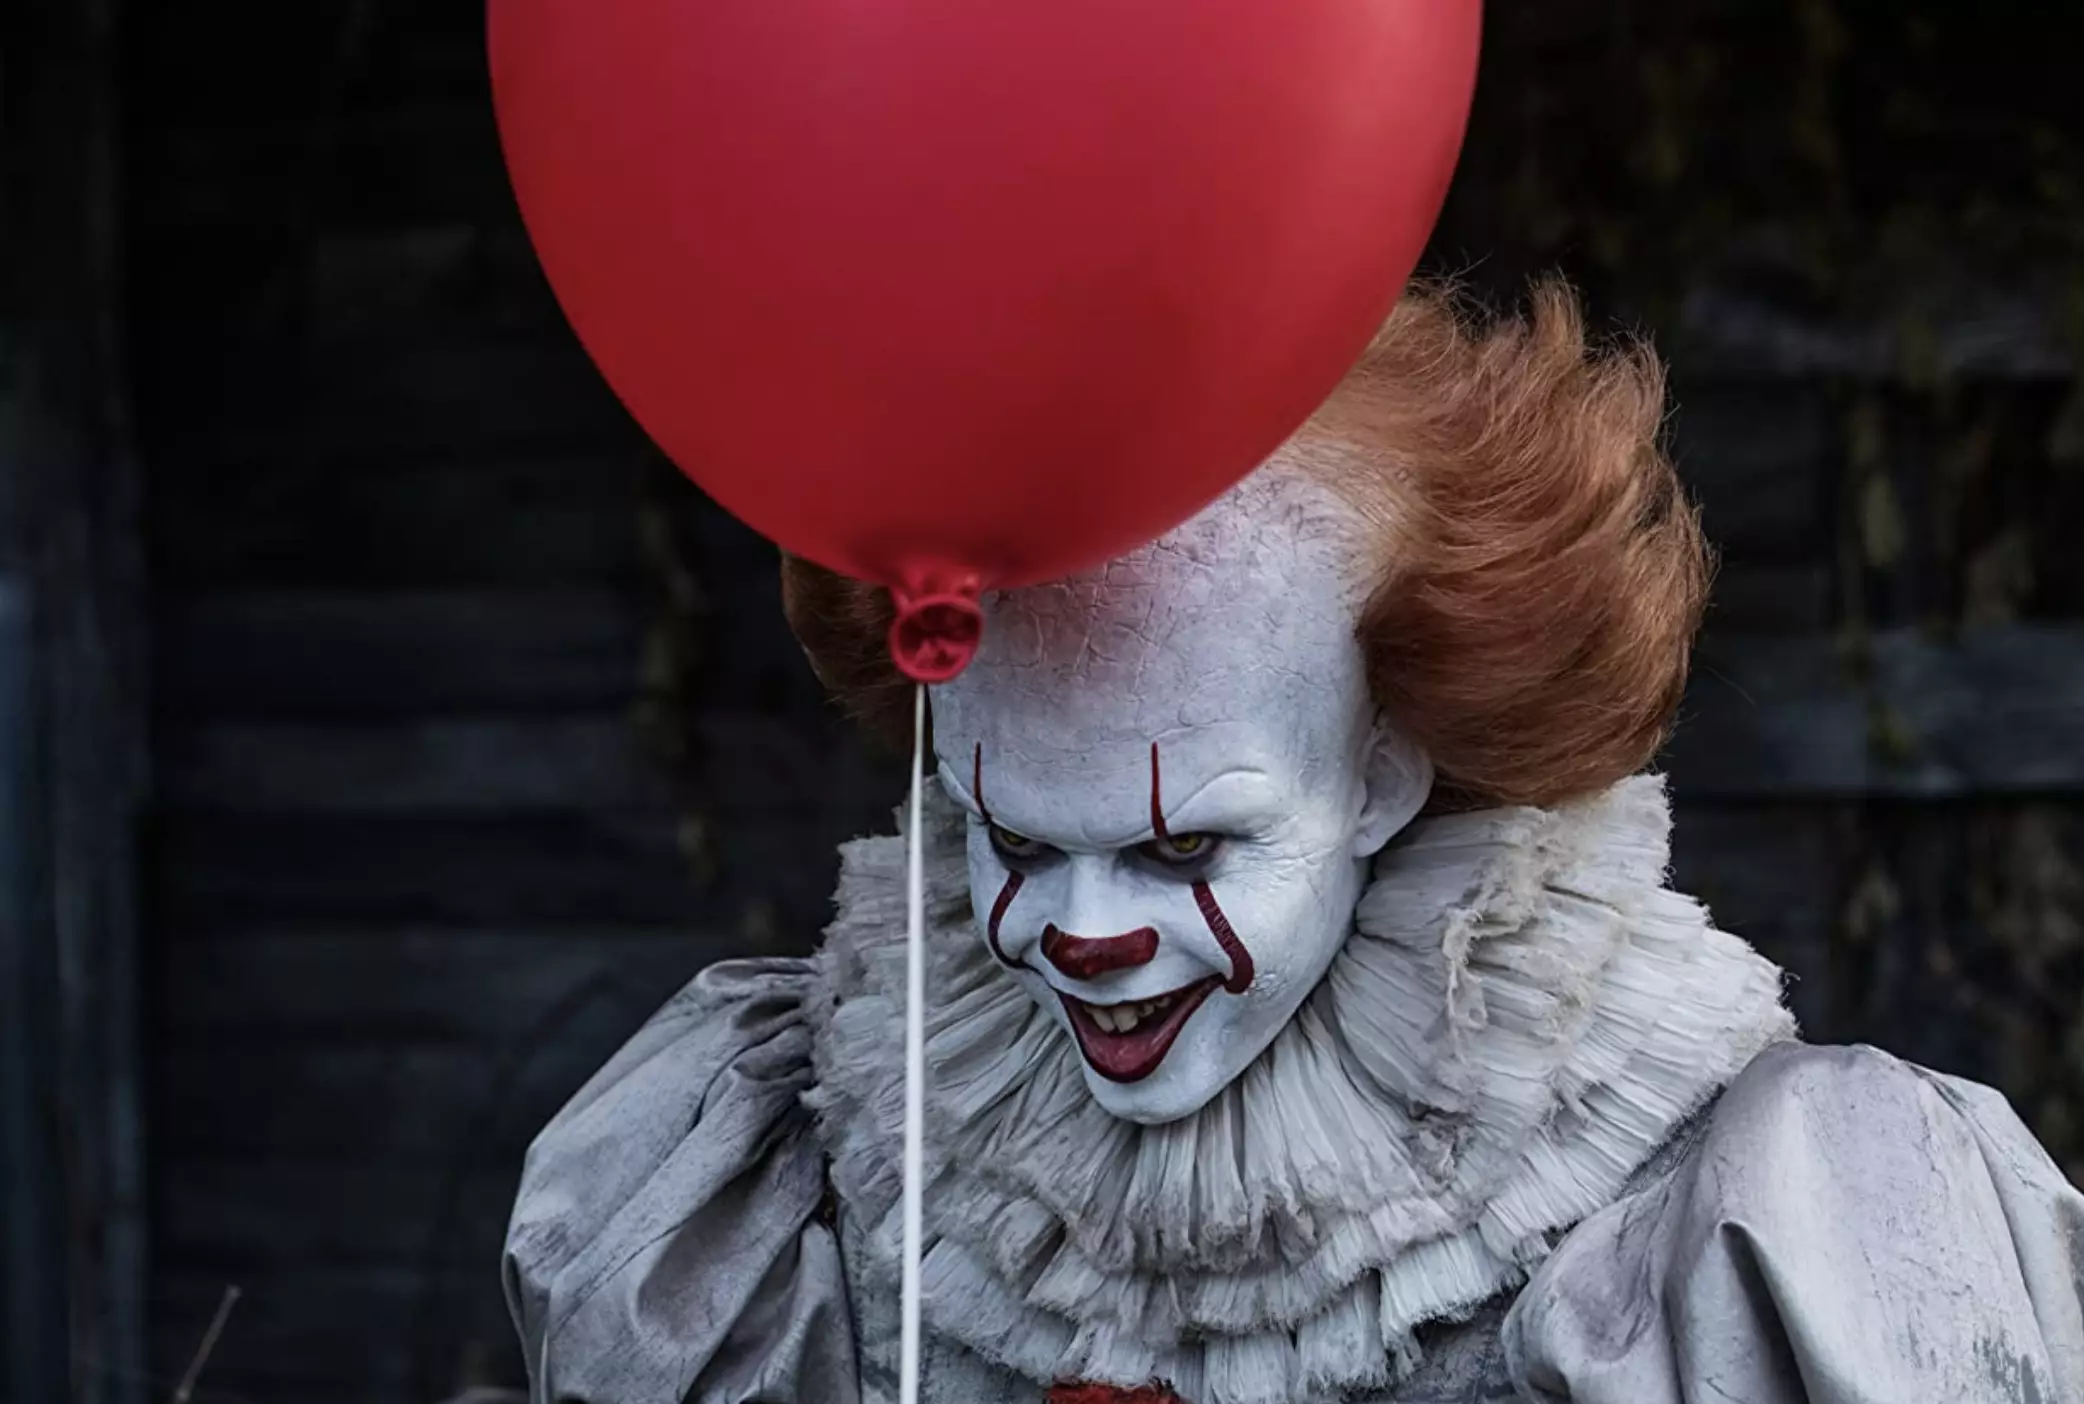 Bill Skarsgård as Pennywise the Clown in the 2017 move IT.